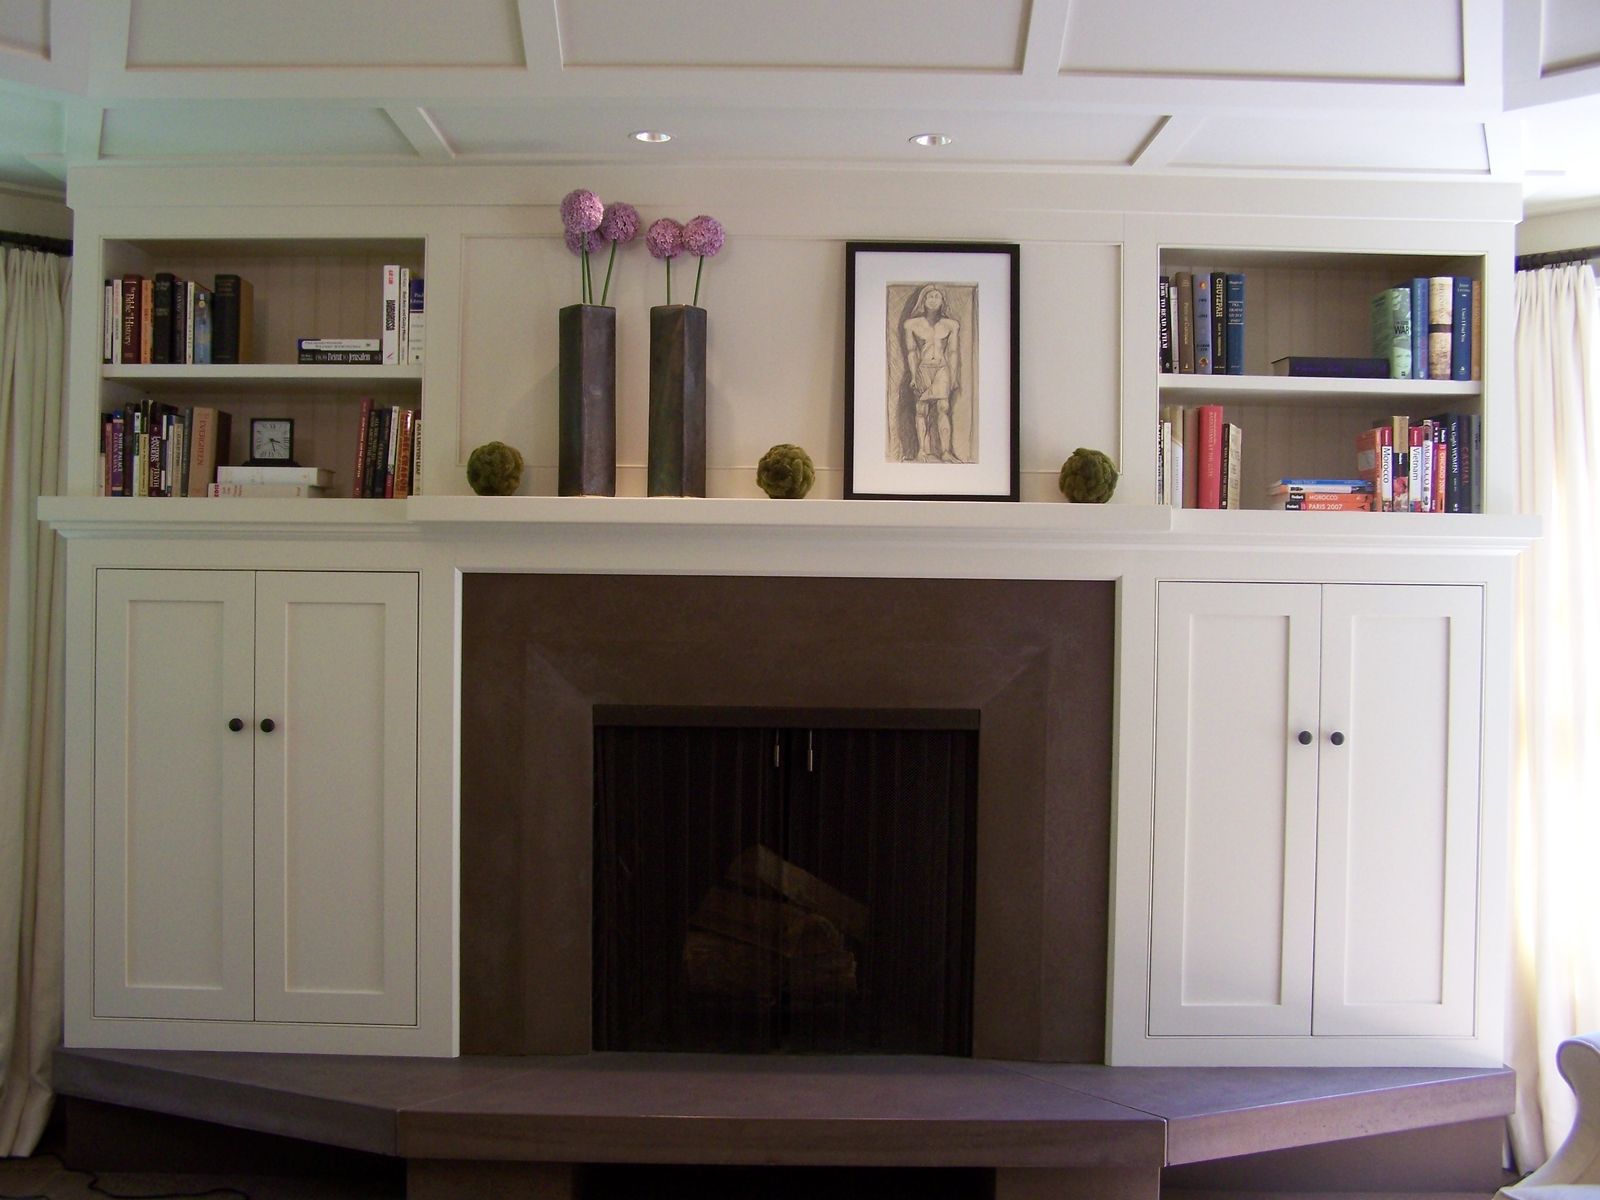 Hand Crafted Arts And Crafts Style Built In Cabinets By G B